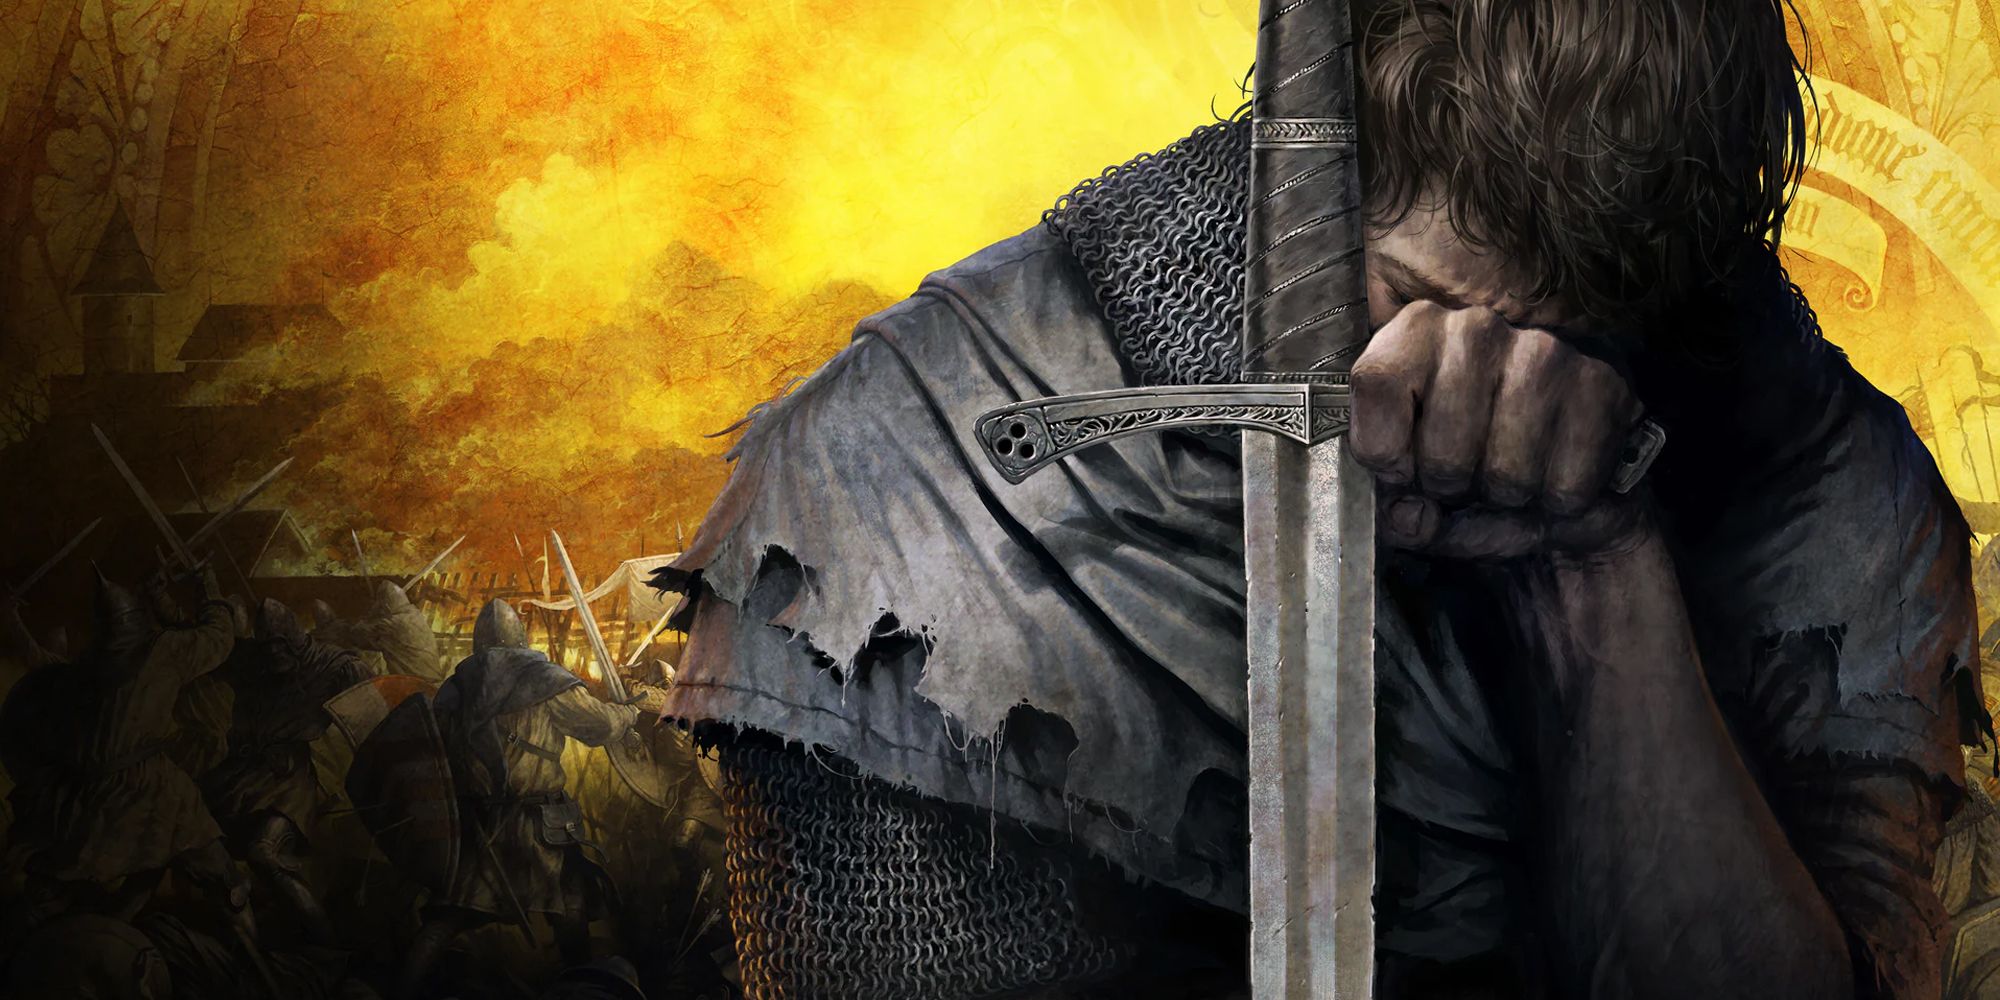 A defeated knight holds the hilt of his sword and looks down, his face obscured by his hand